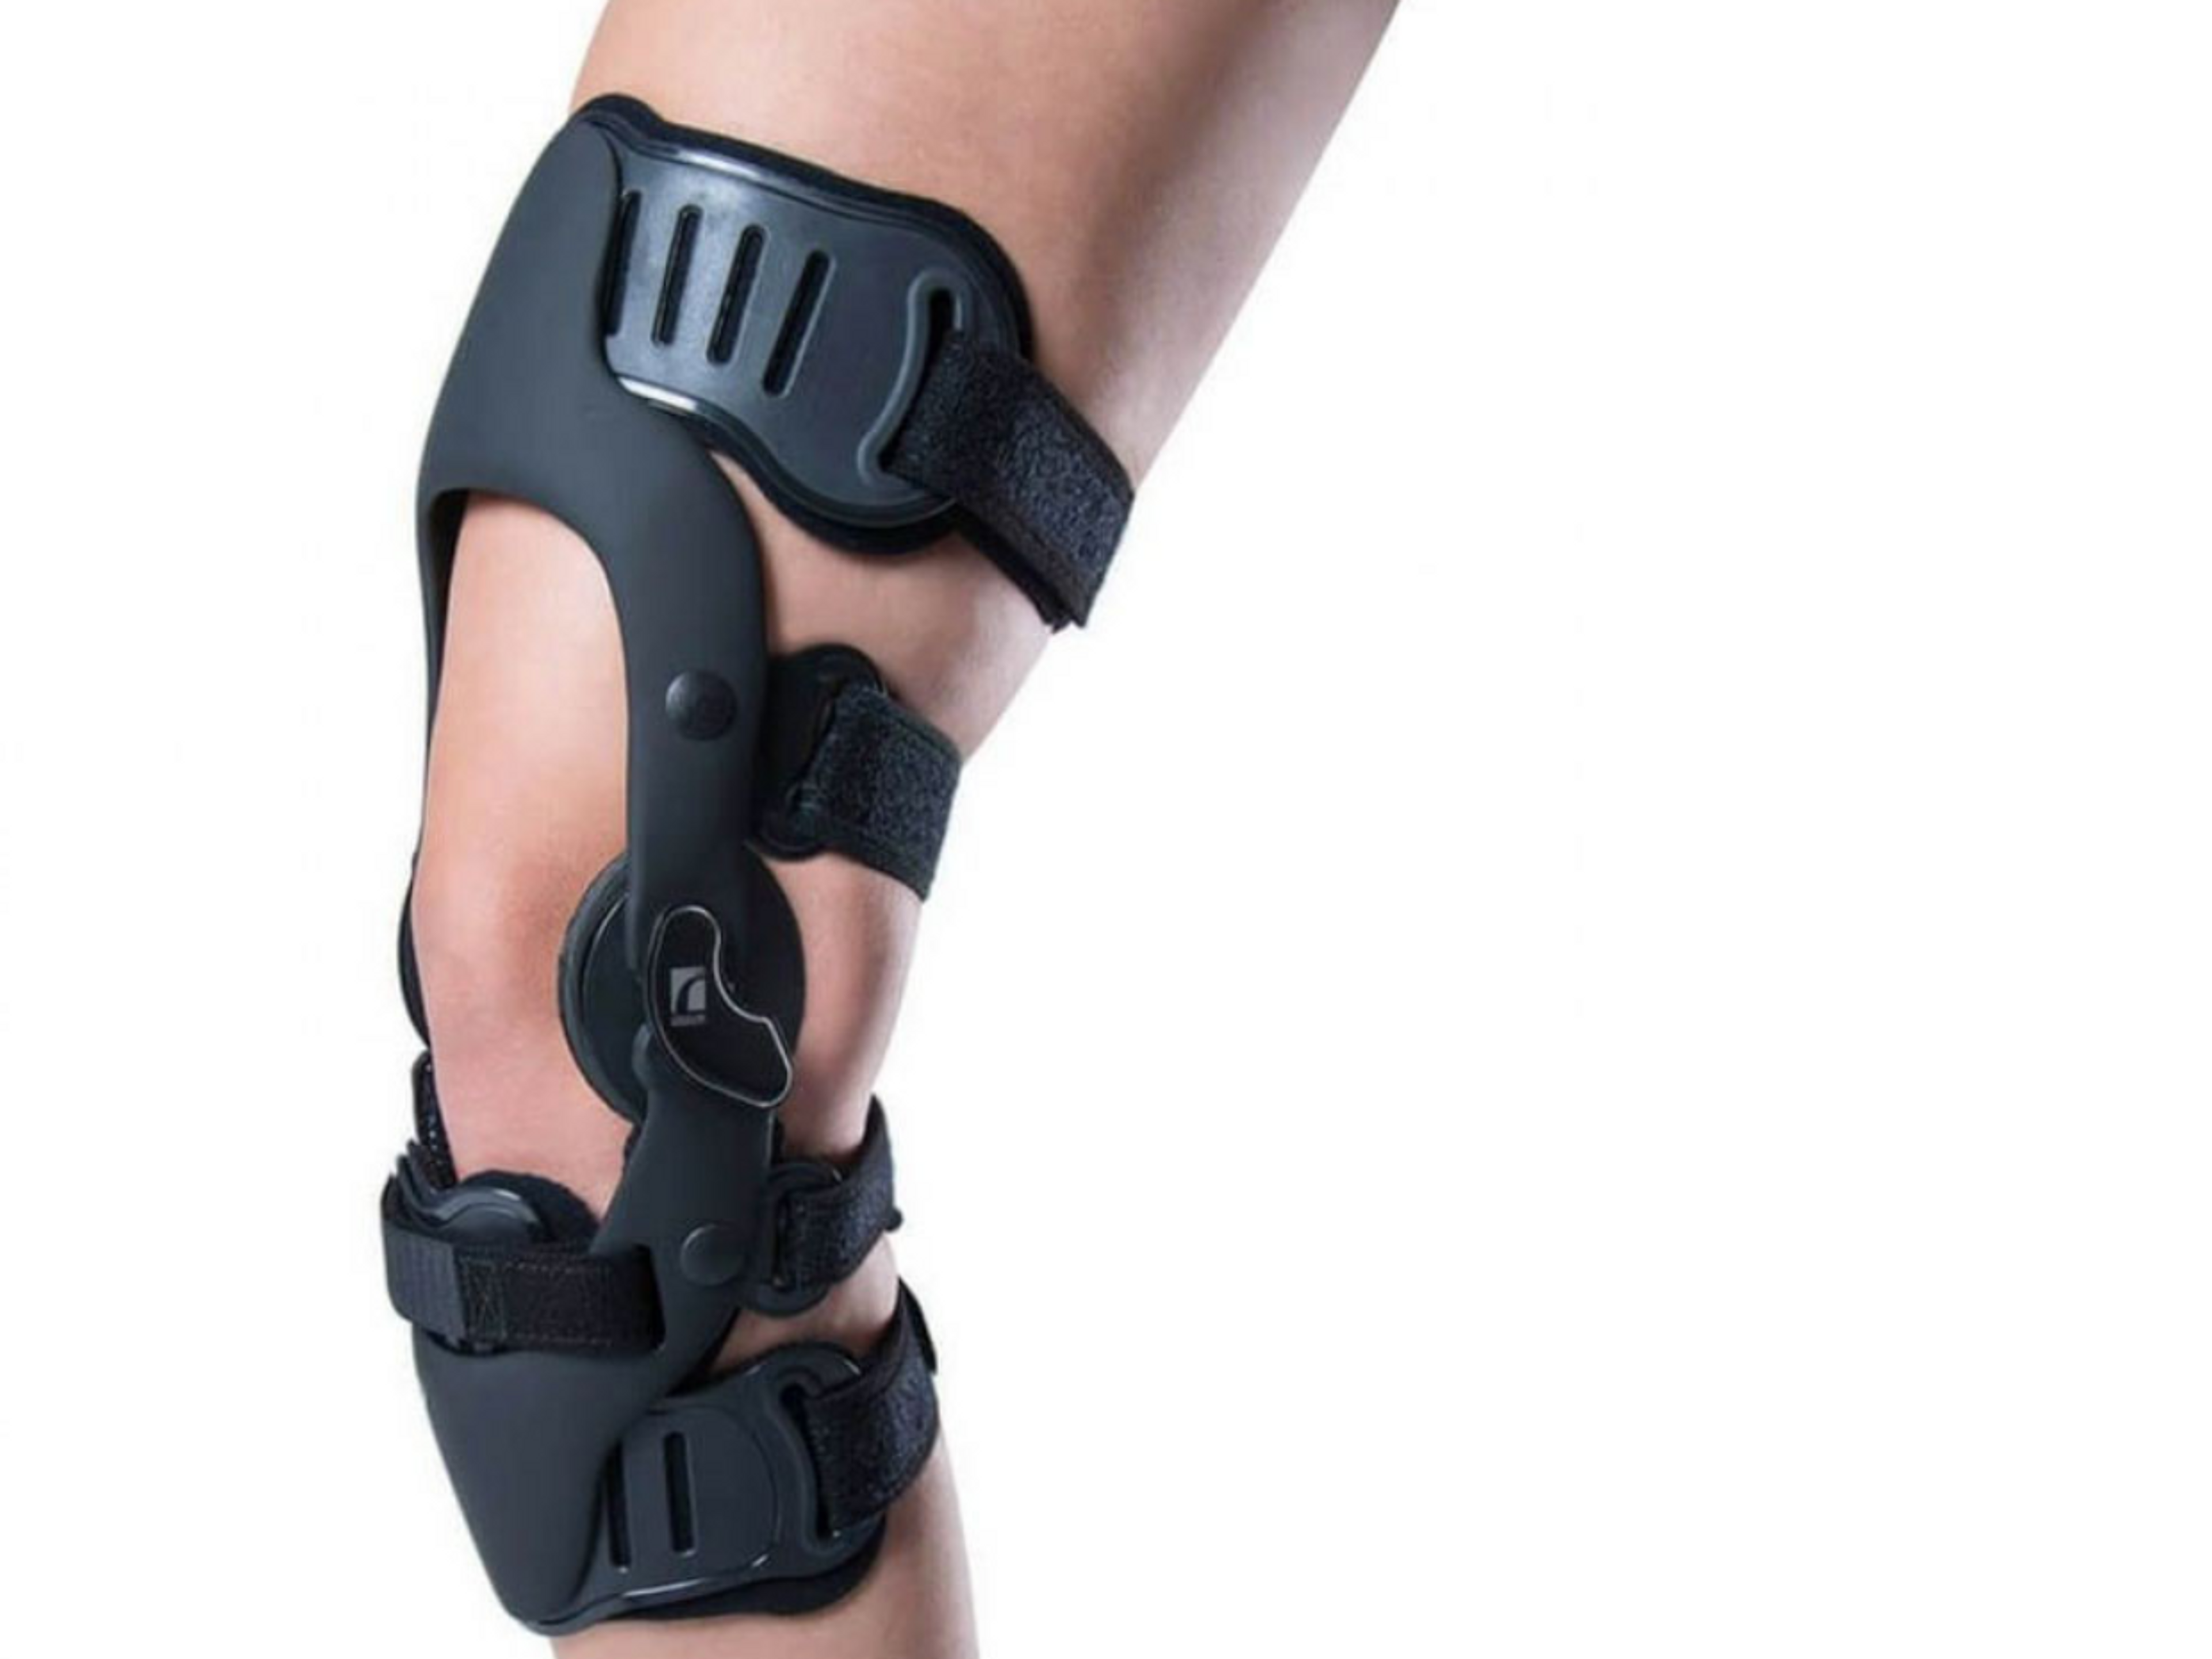 Rigid hinged brace used for meniscus tears in combination with ACL tears.